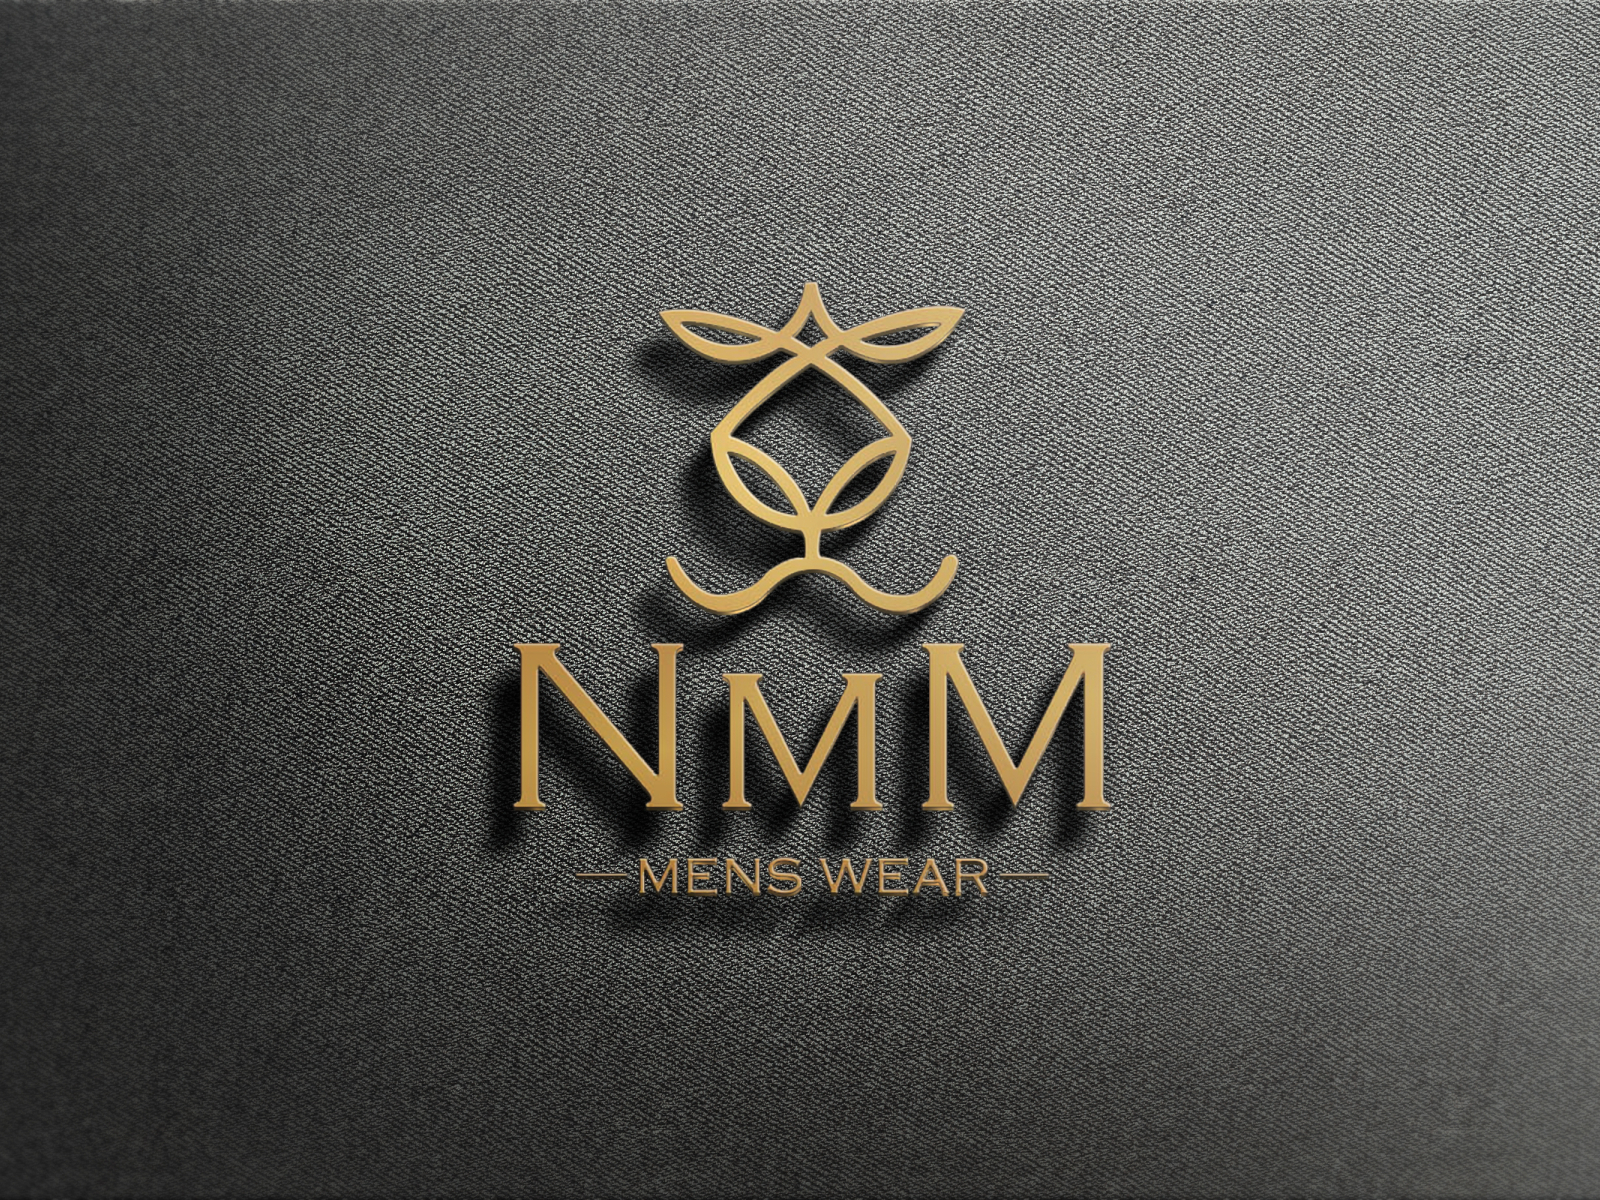 Clothing Brand | Logo Design by Chitra S. on Dribbble